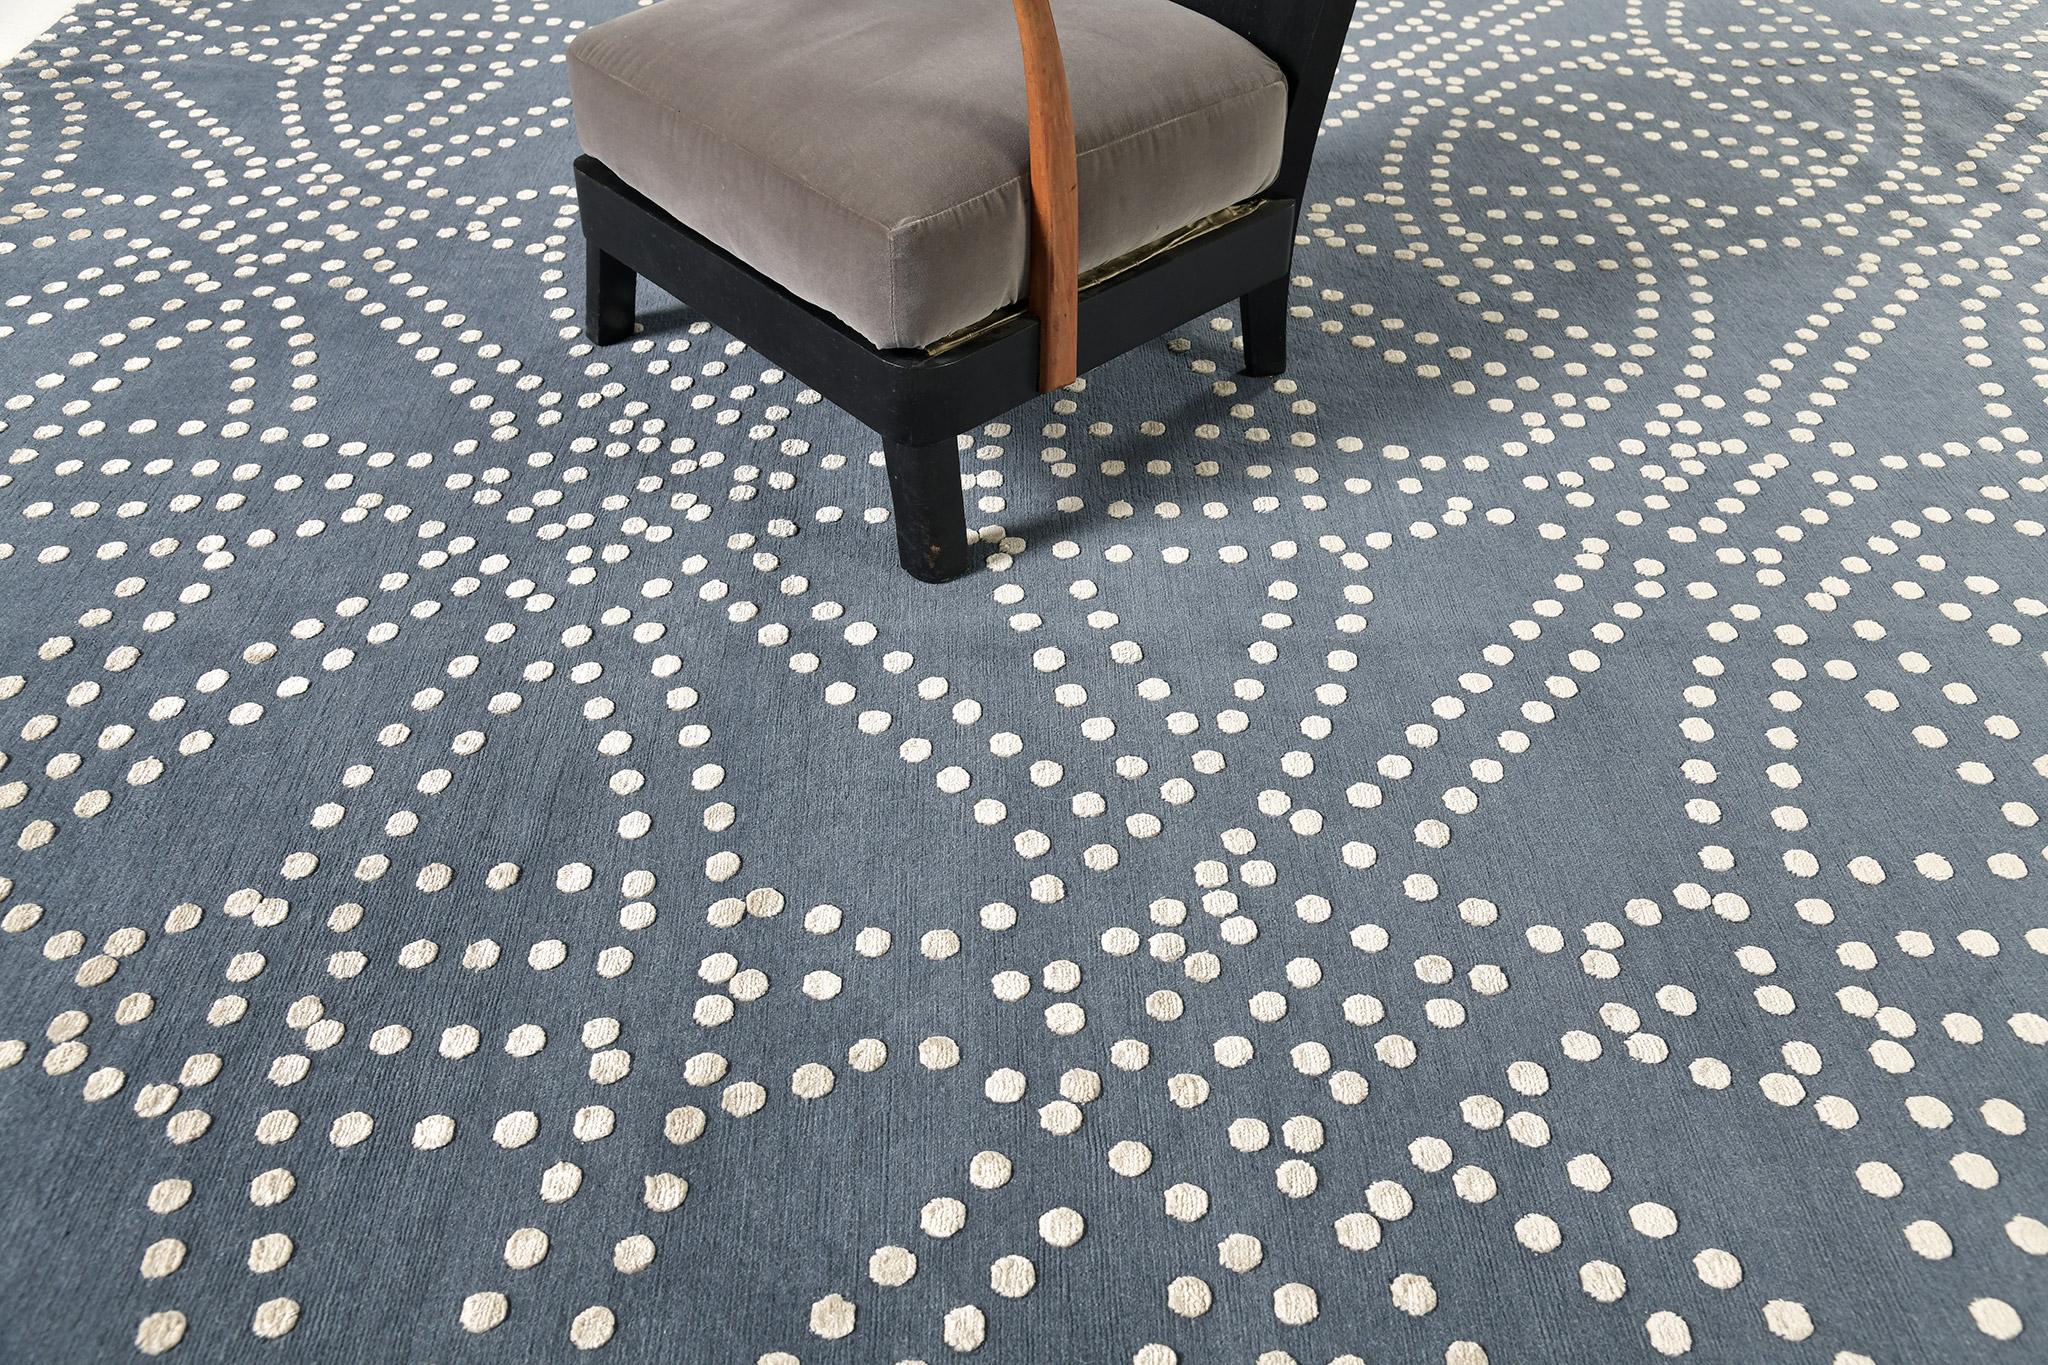 Ruote is a transitional design with seamless geometrical patterns of dotted circles. It gives a lustrous effect that can brighten the ambiance of your room. It can be an accent rug that will challenge the interior designer's creativity.

Rug